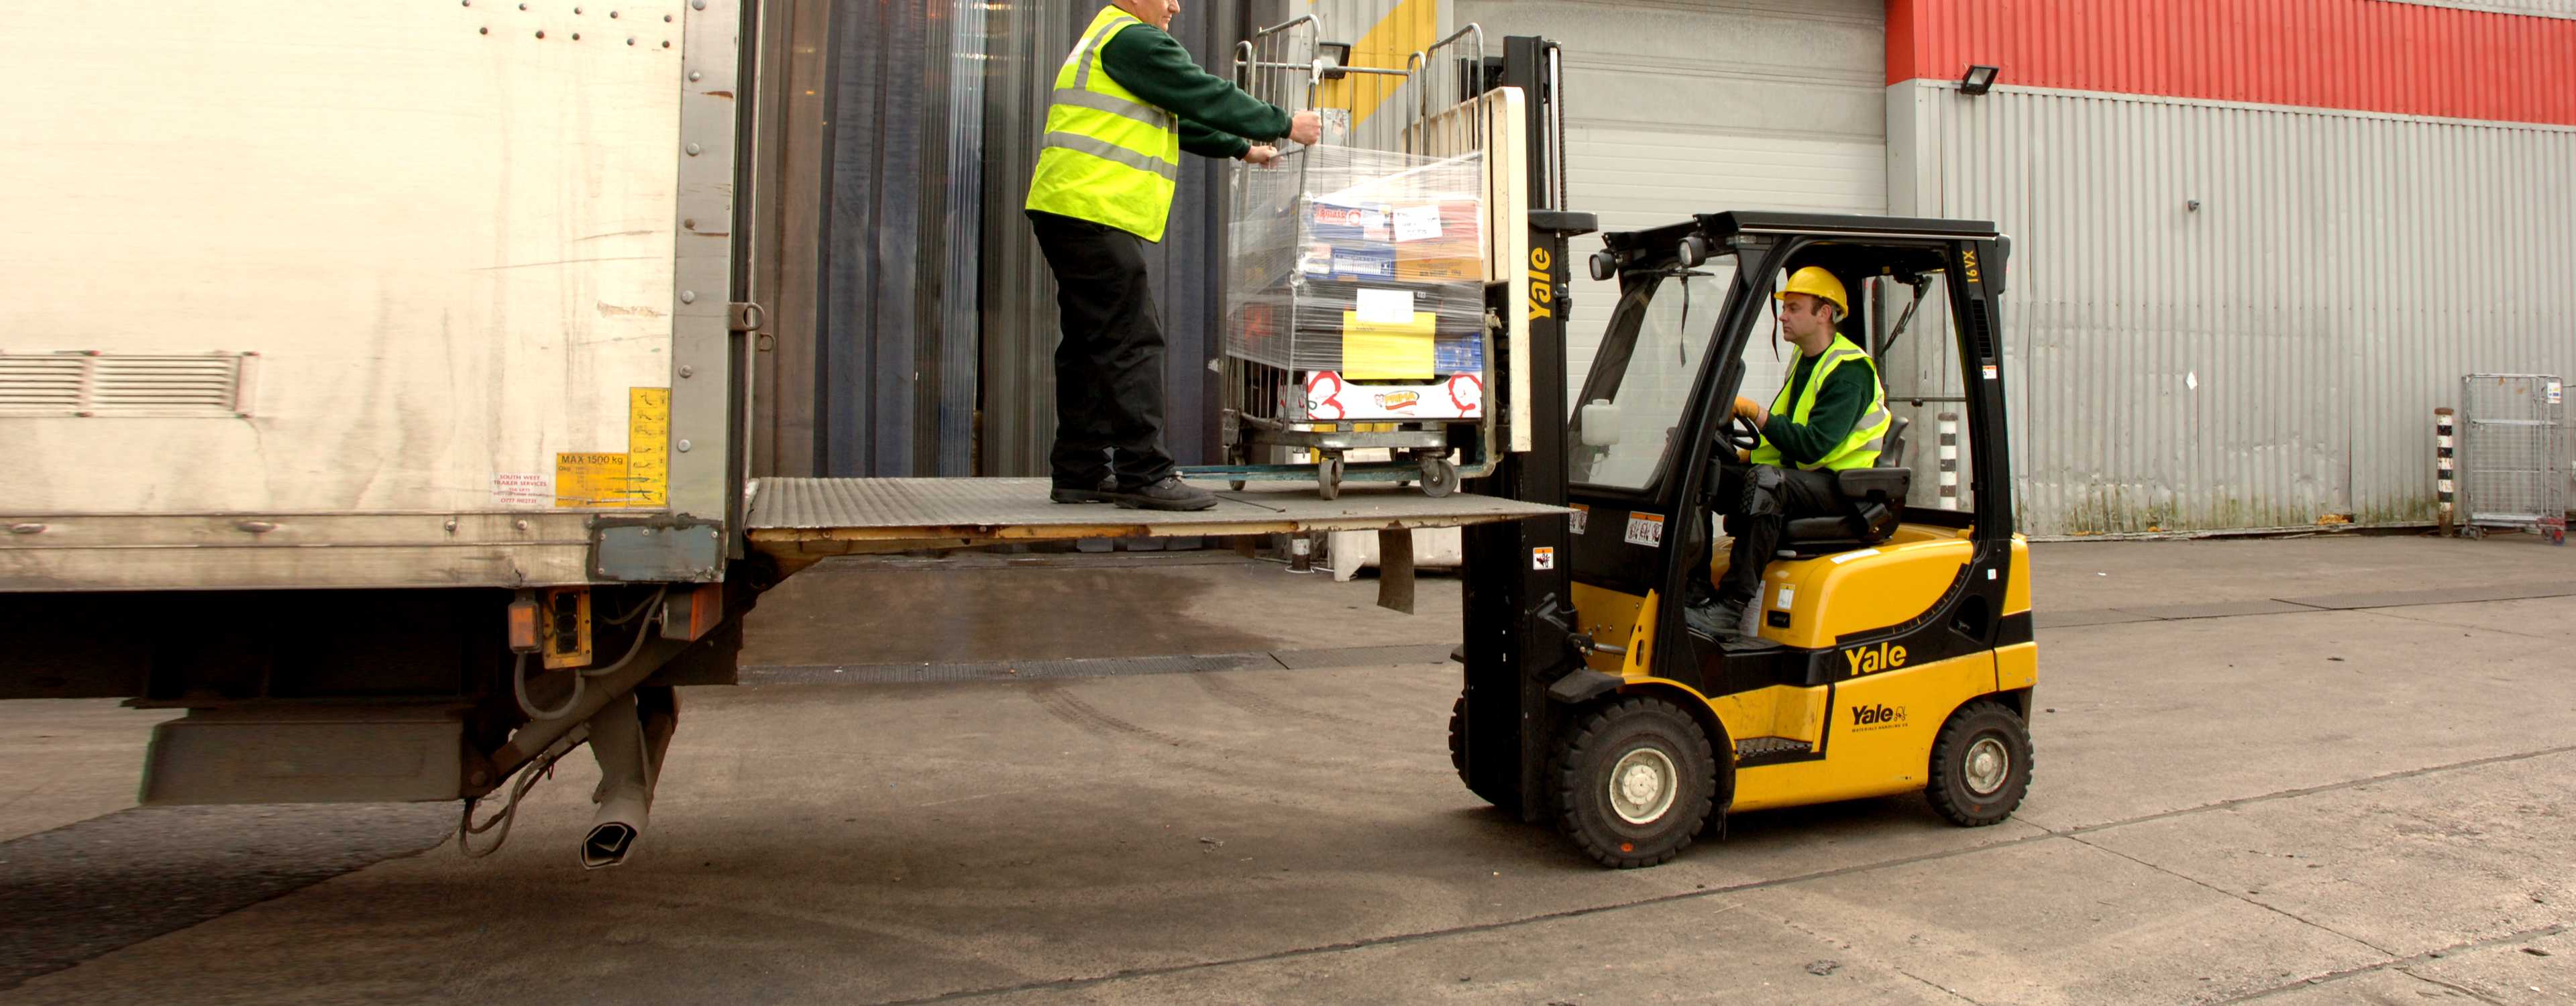 Townsville Forklift Hire New Used Forklifts For Sale